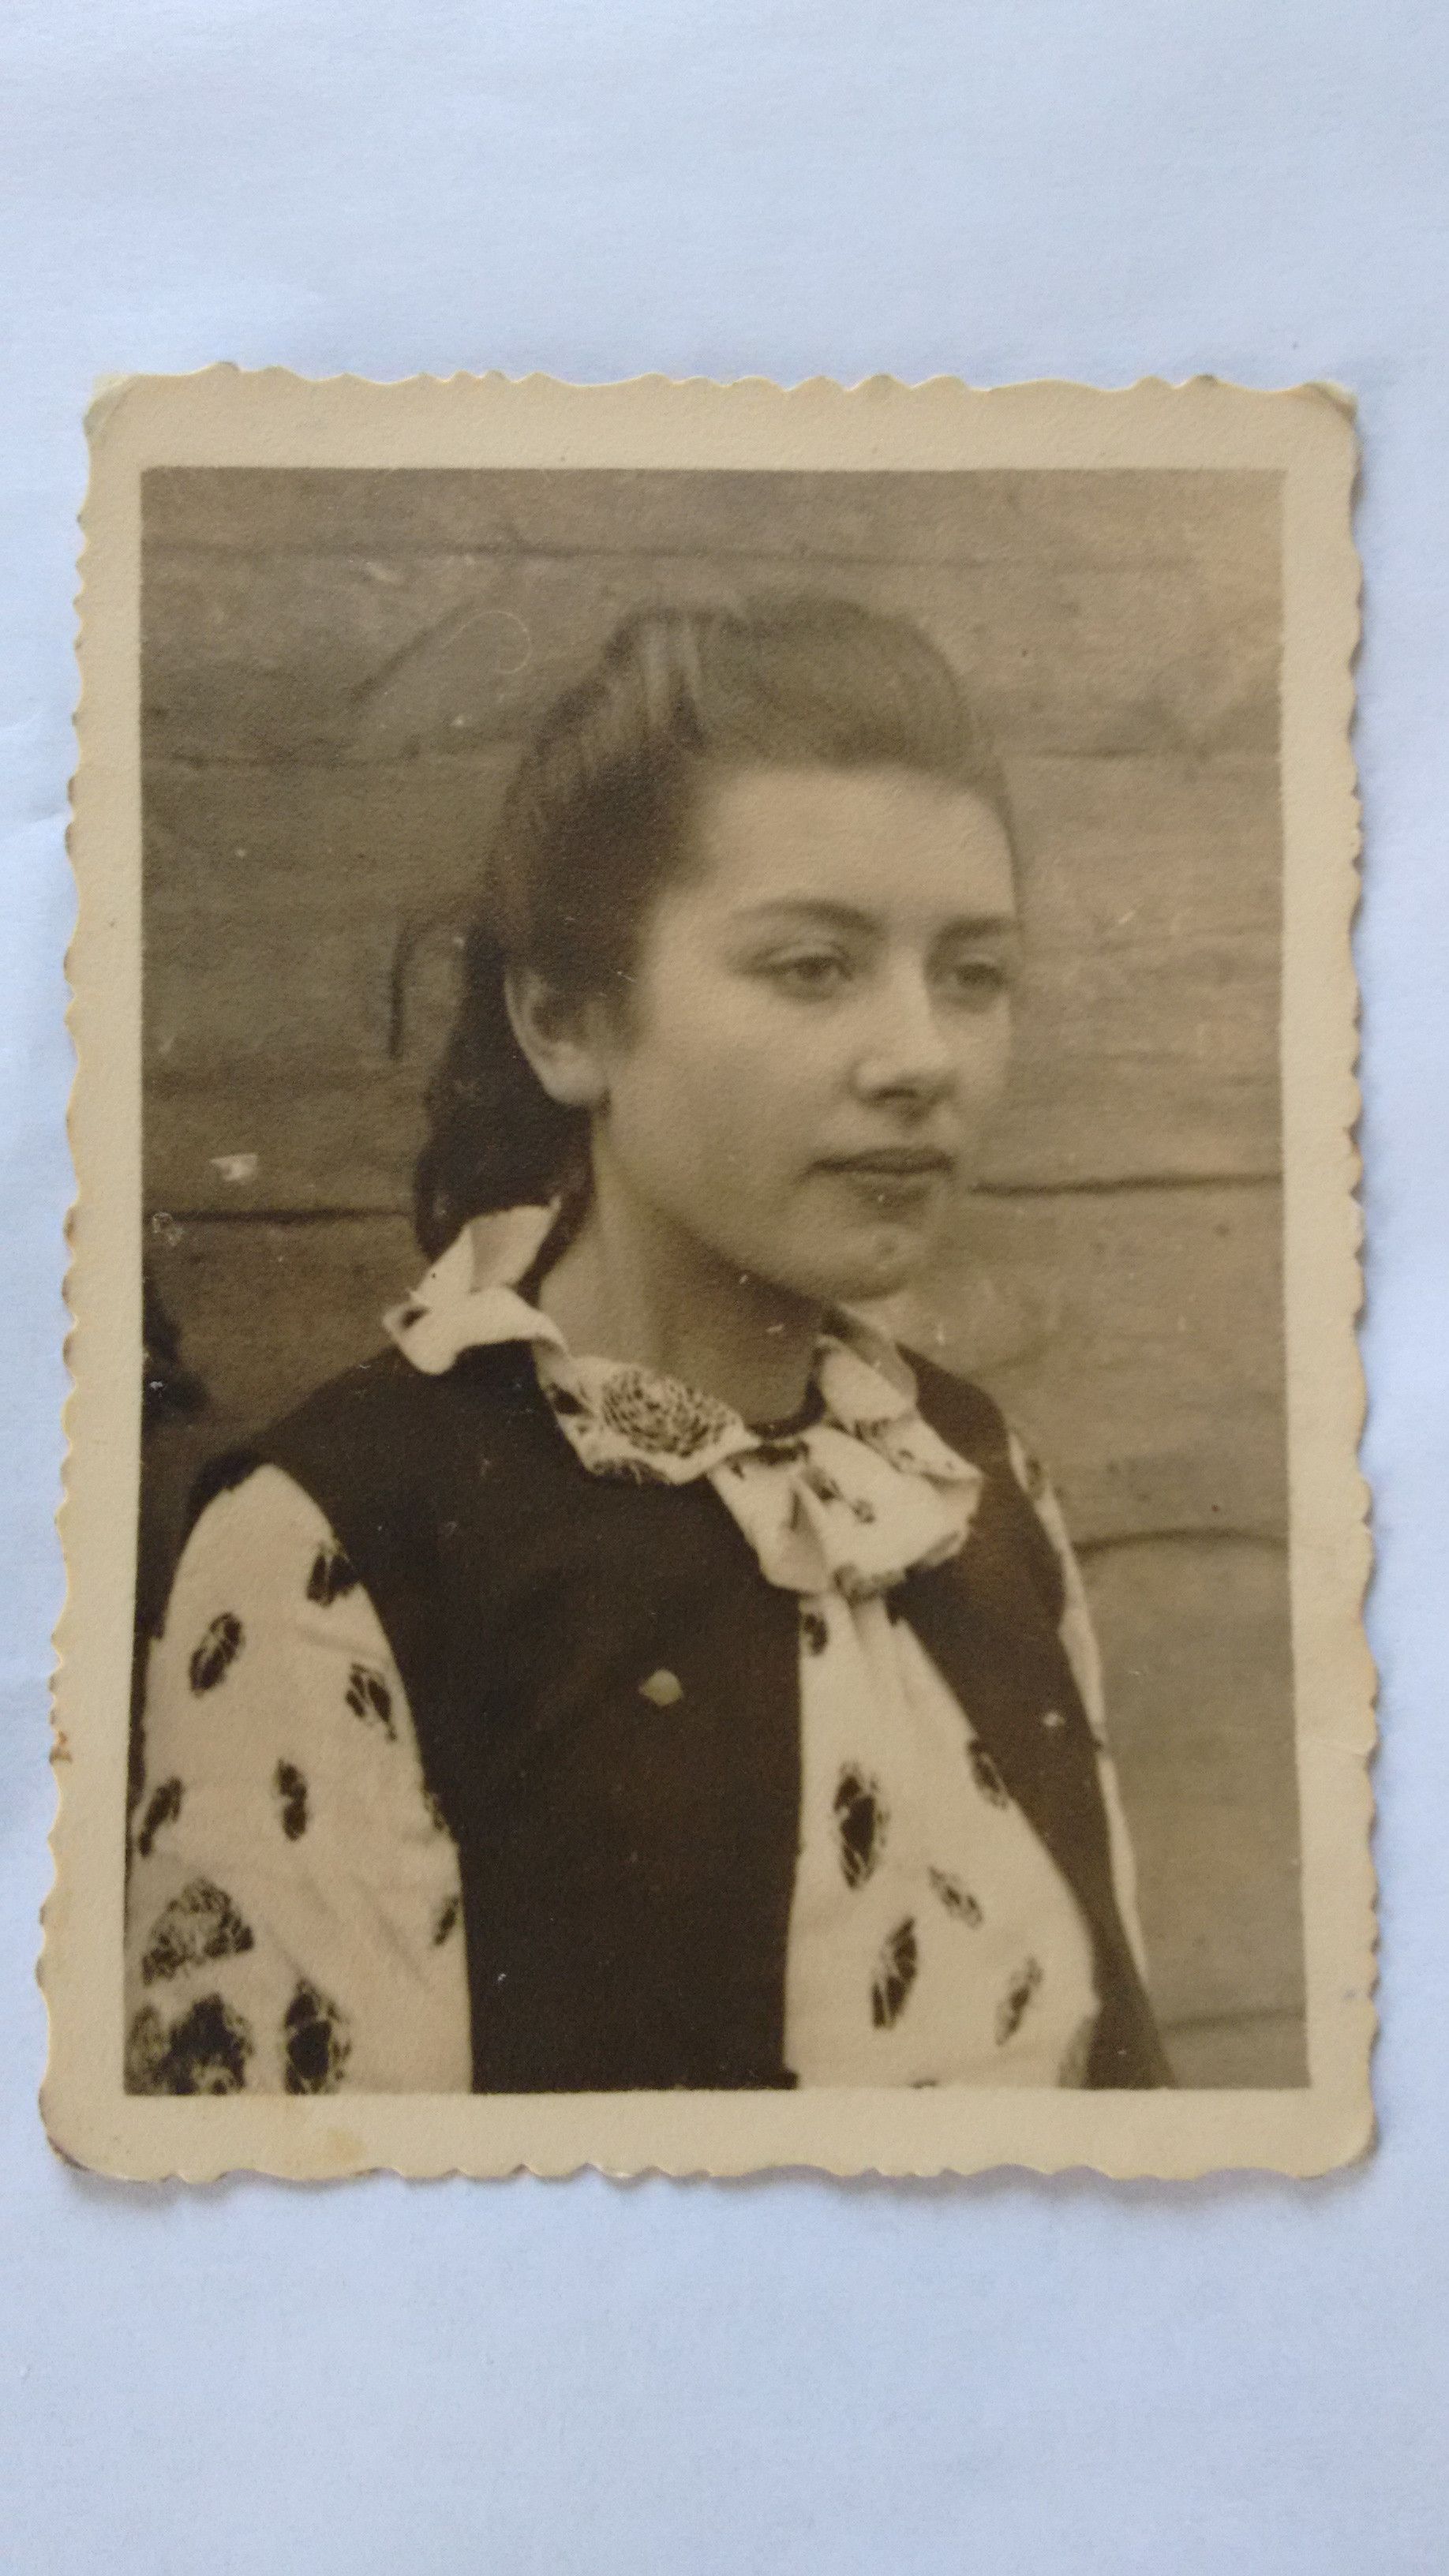 My Grandmother minutes before being taken away to a work camp by the Germans.